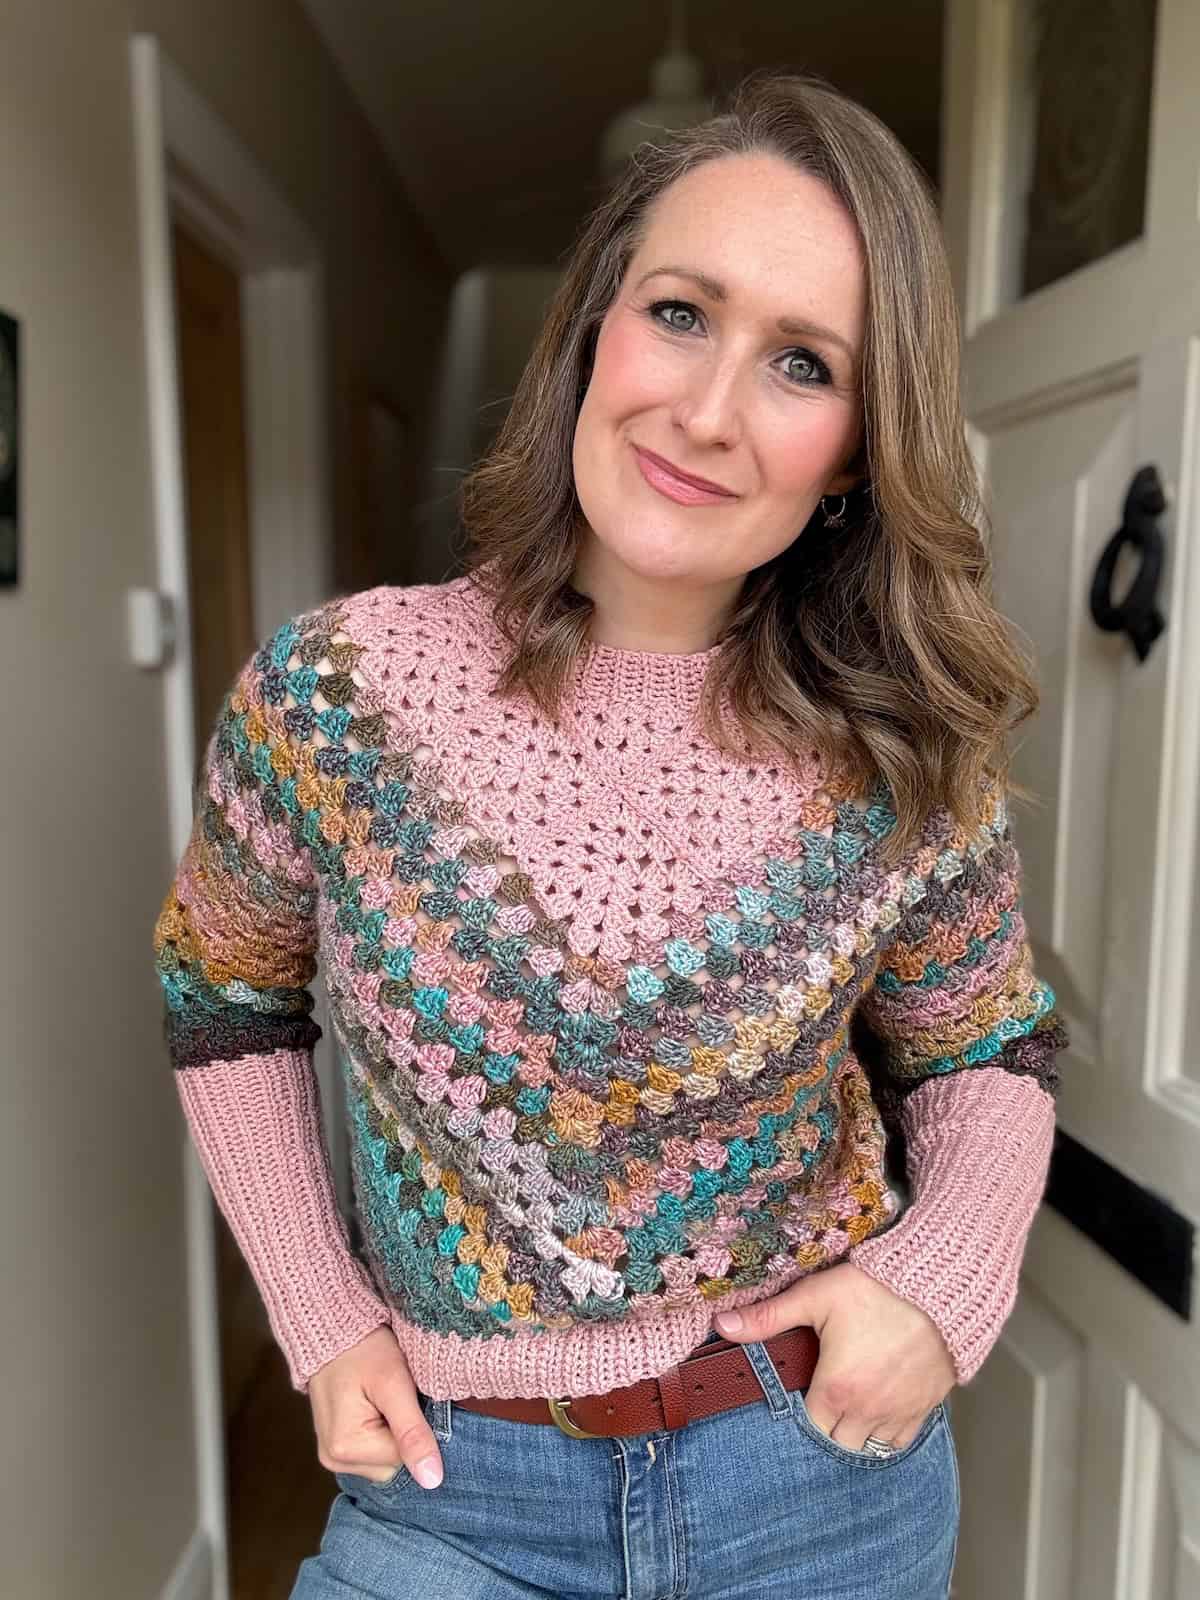 Woman in doorway wearing colourful granny square sweater.